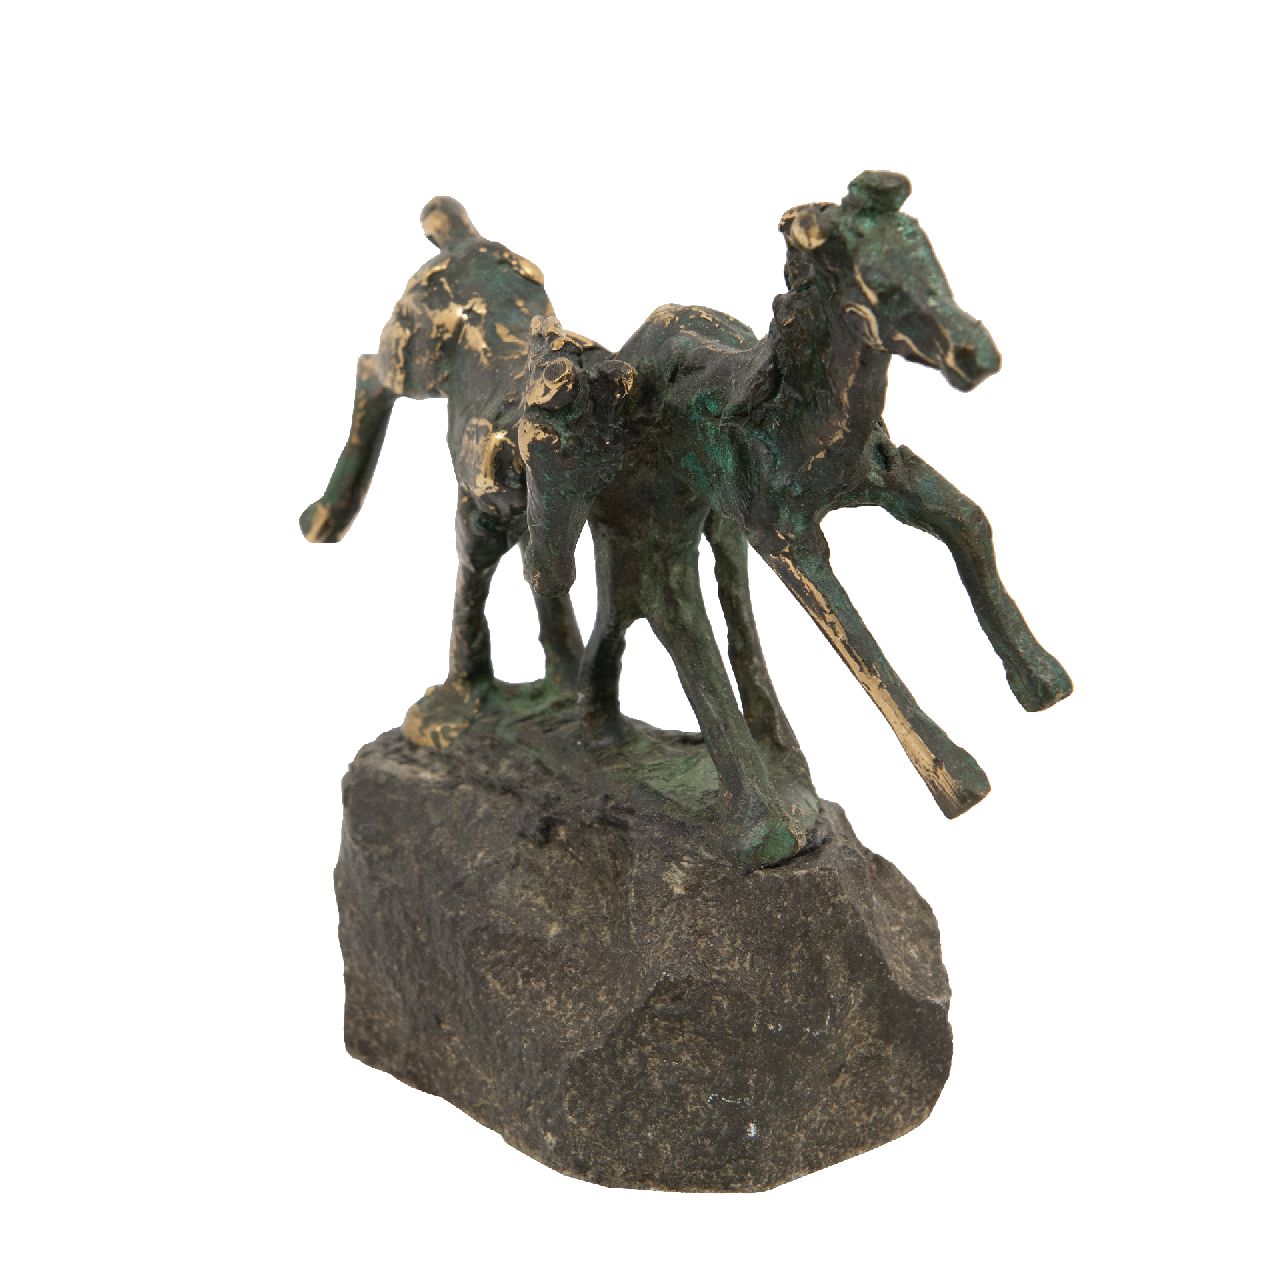 Bakker W.F.  | Willem Frederik 'Jits' Bakker | Sculptures and objects offered for sale | Two playing foals, bronze 10.3 x 11.4 cm, signed on the base